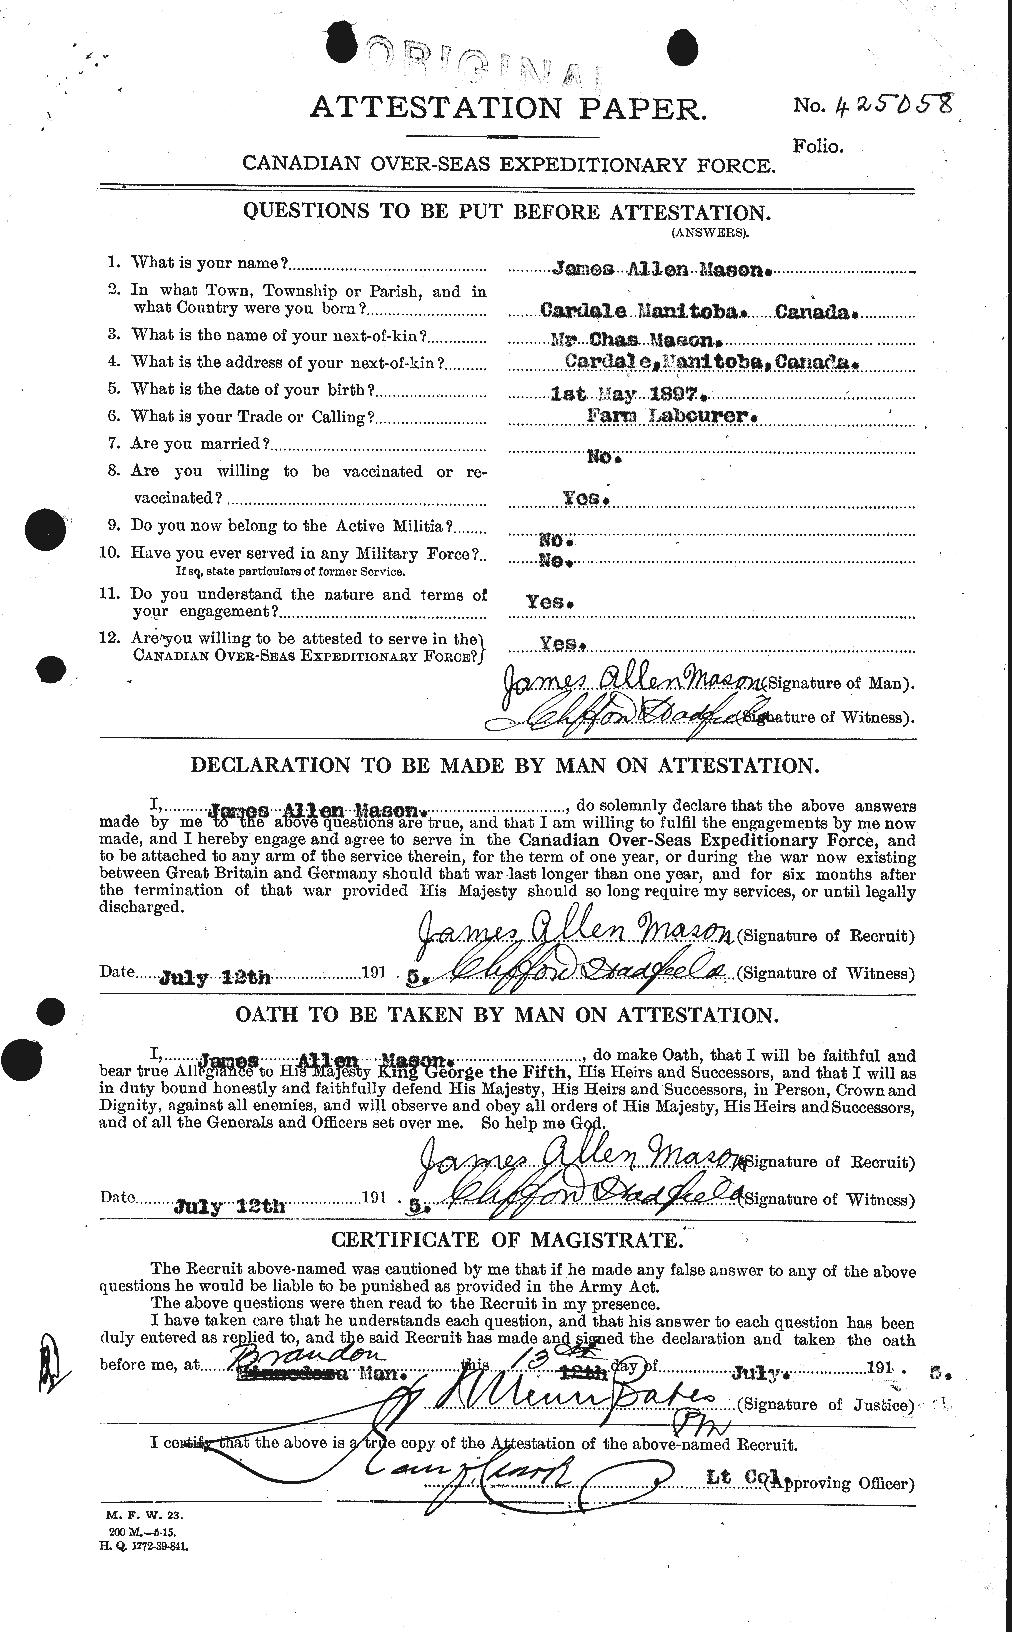 Personnel Records of the First World War - CEF 484640a